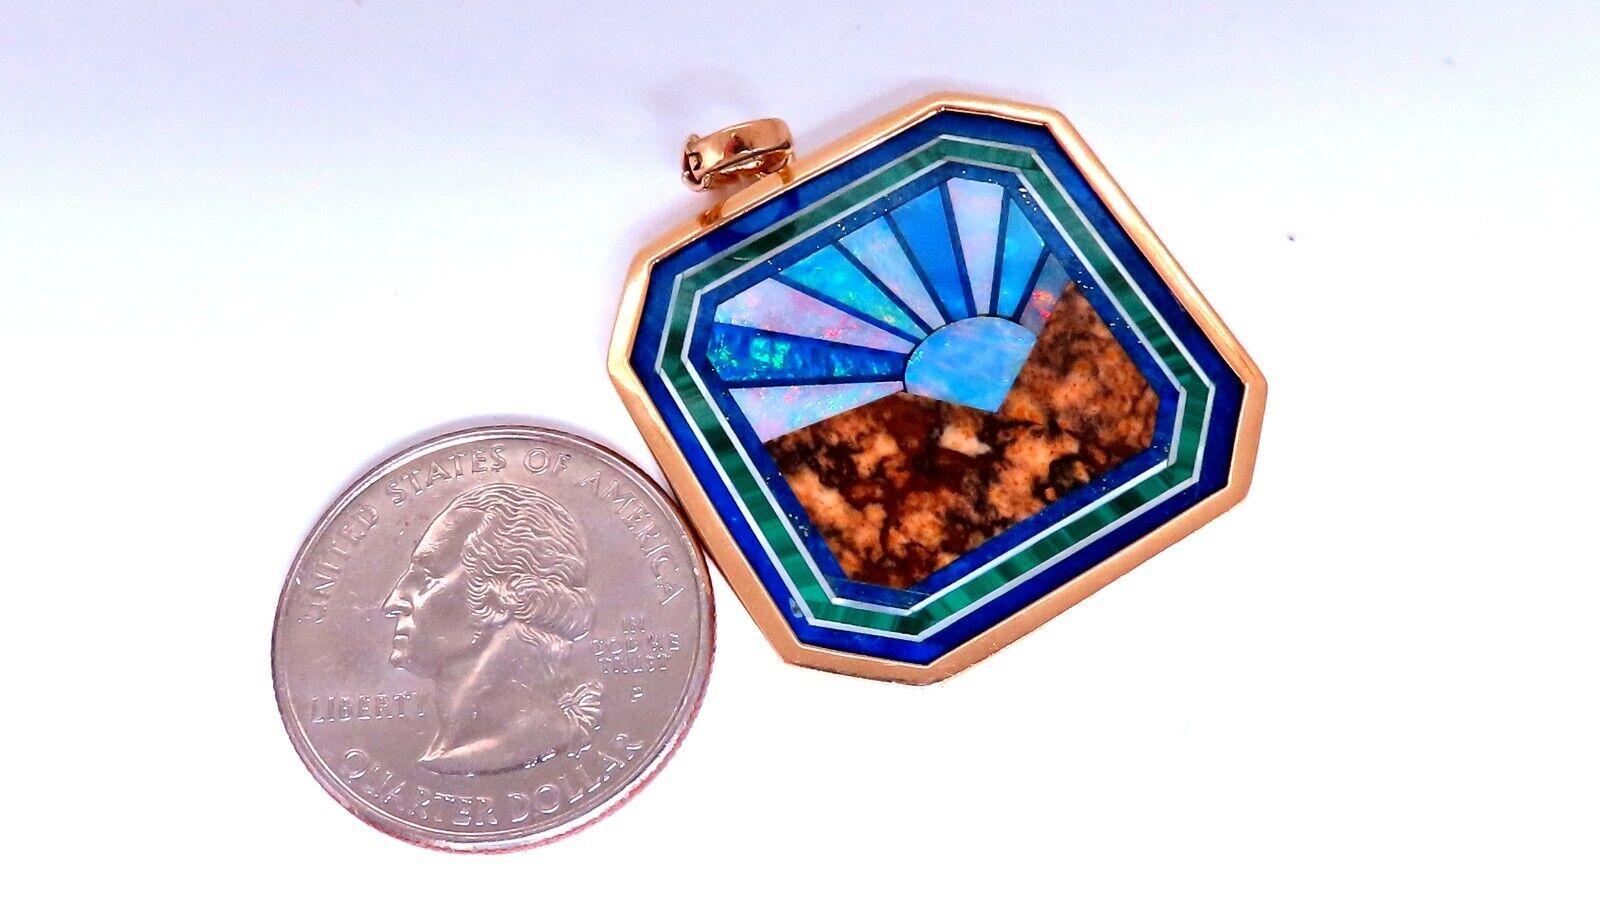 Rising Sun Mosaic Inlay Pendant

Carved Opal, Malachite, Lapis, amd Tiger-eye

Pendant Overall Measurement: 31 x 31mm

14kt. yellow gold

Grand weight: 8.4 grams